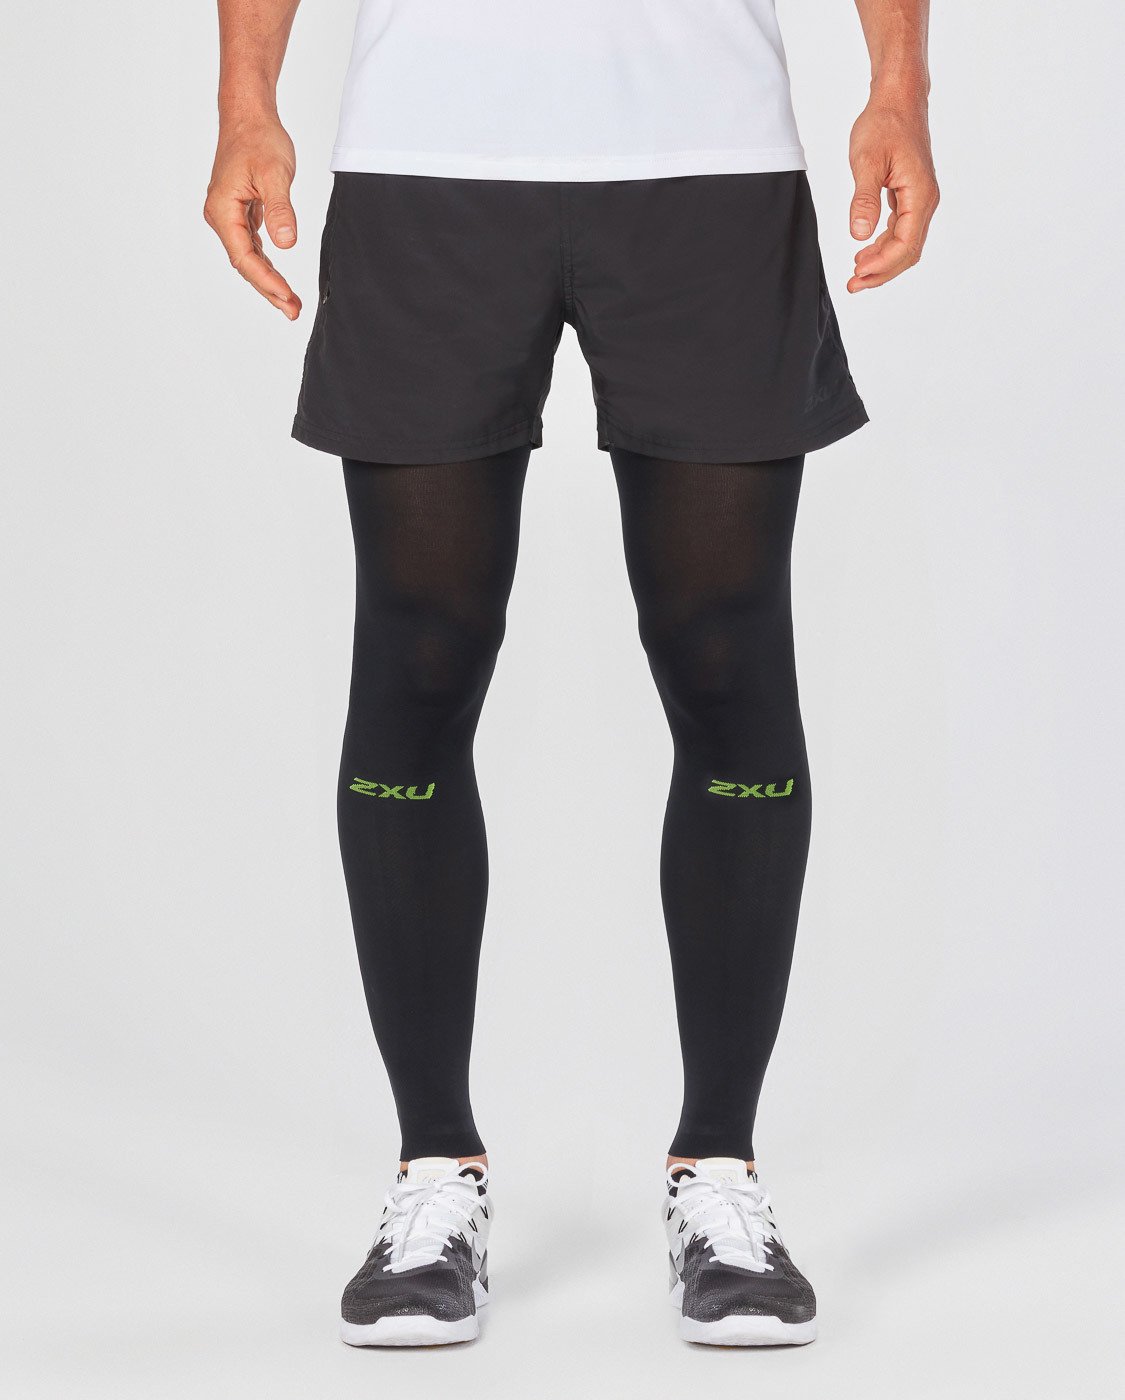 Men - Accessories - Arm and Leg Sleeves – 2XU Singapore